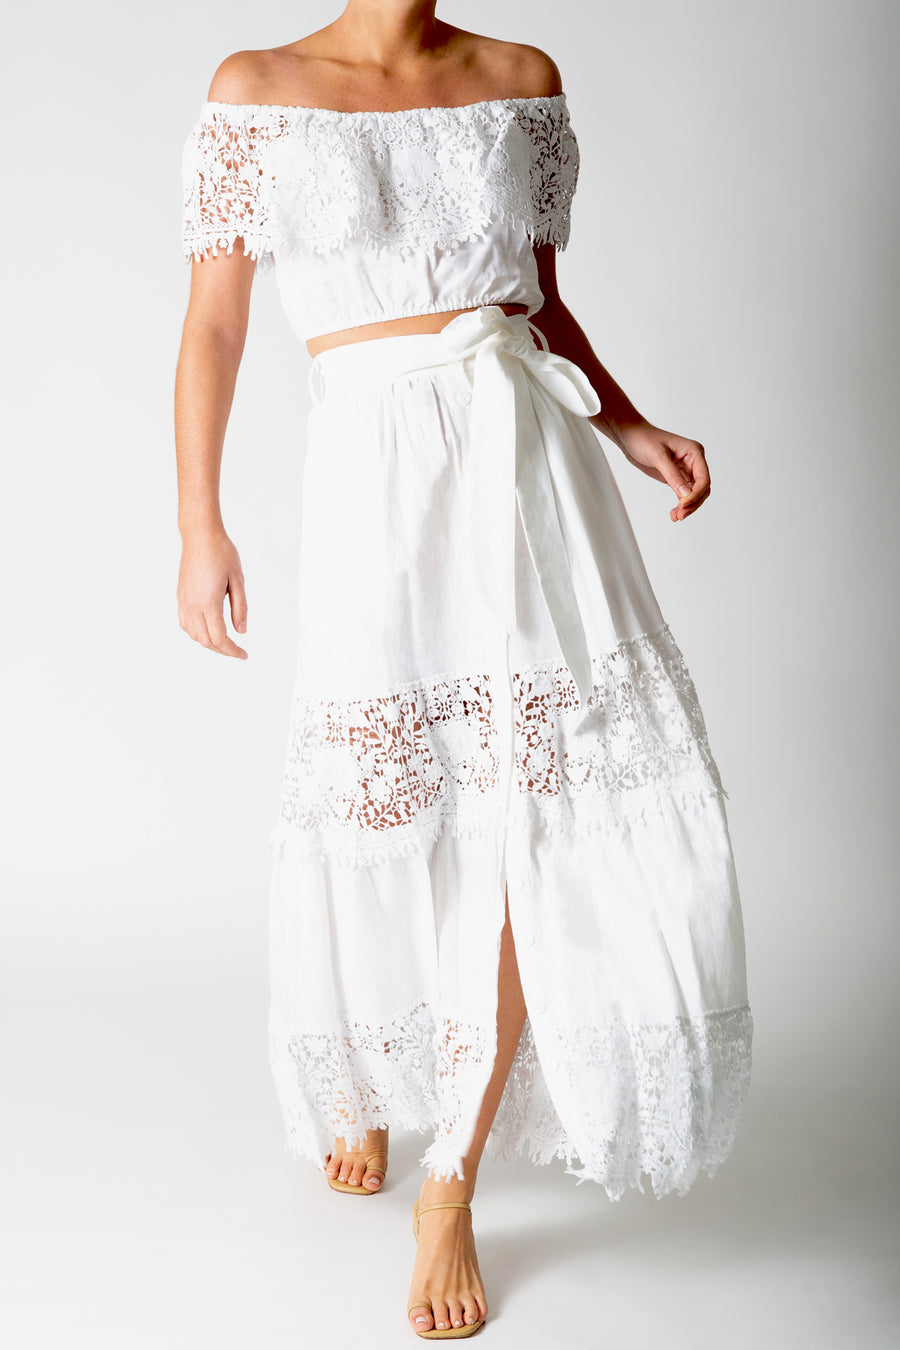 This is a photo of a woman wearing a white lace crop top with a matching white maxi skirt.